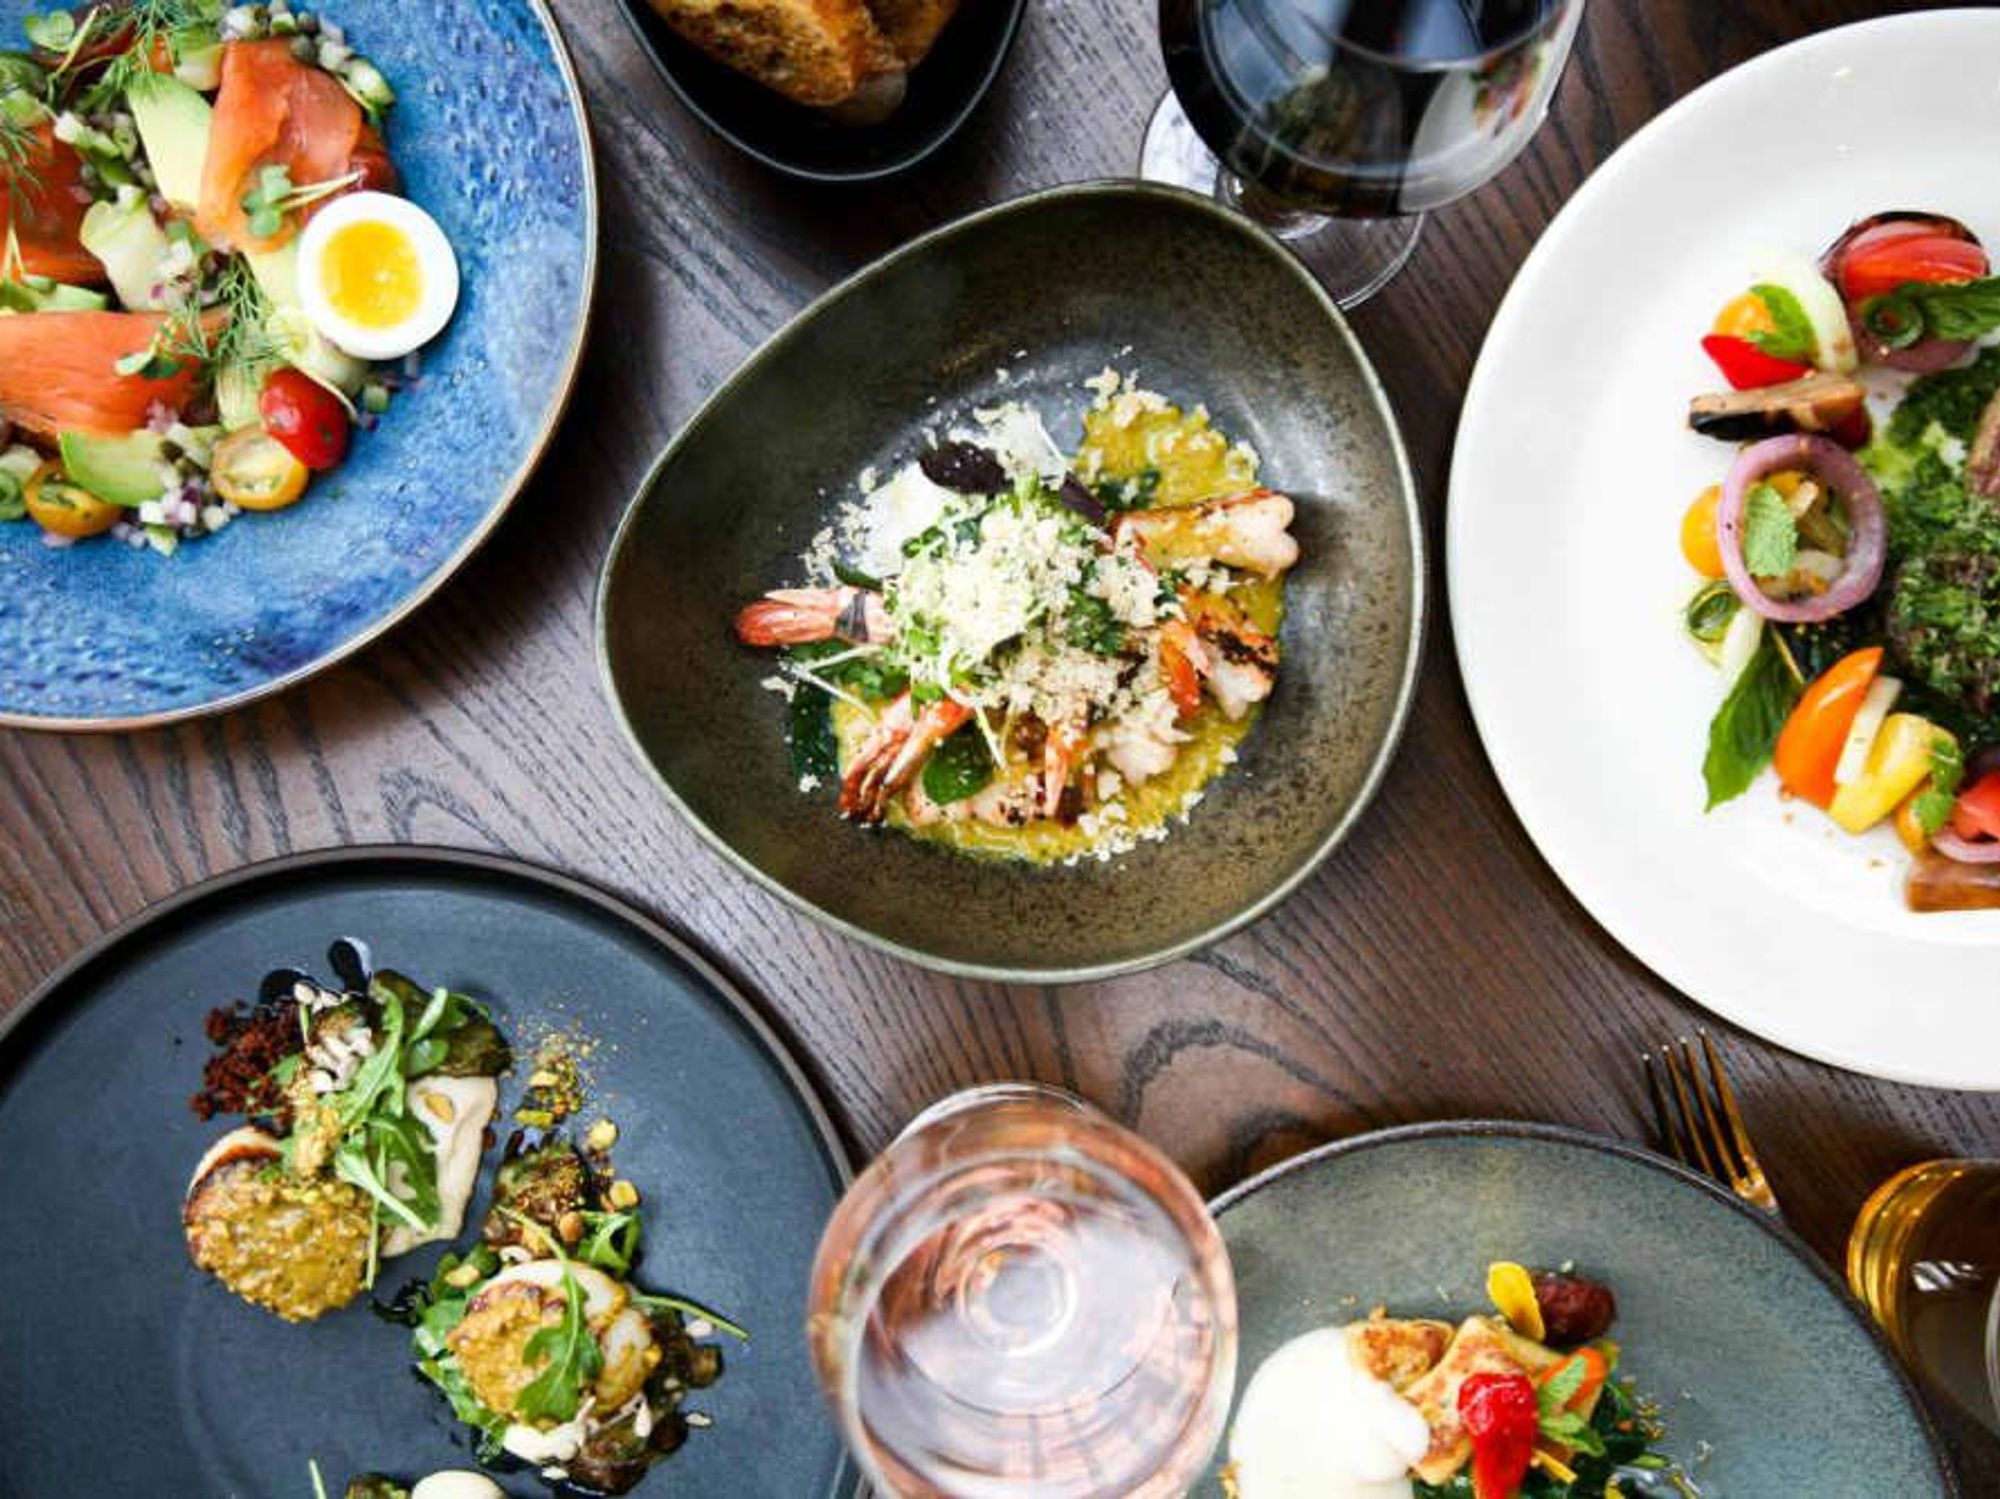 Upscale plates by Second Bar + Kitchen in Austin